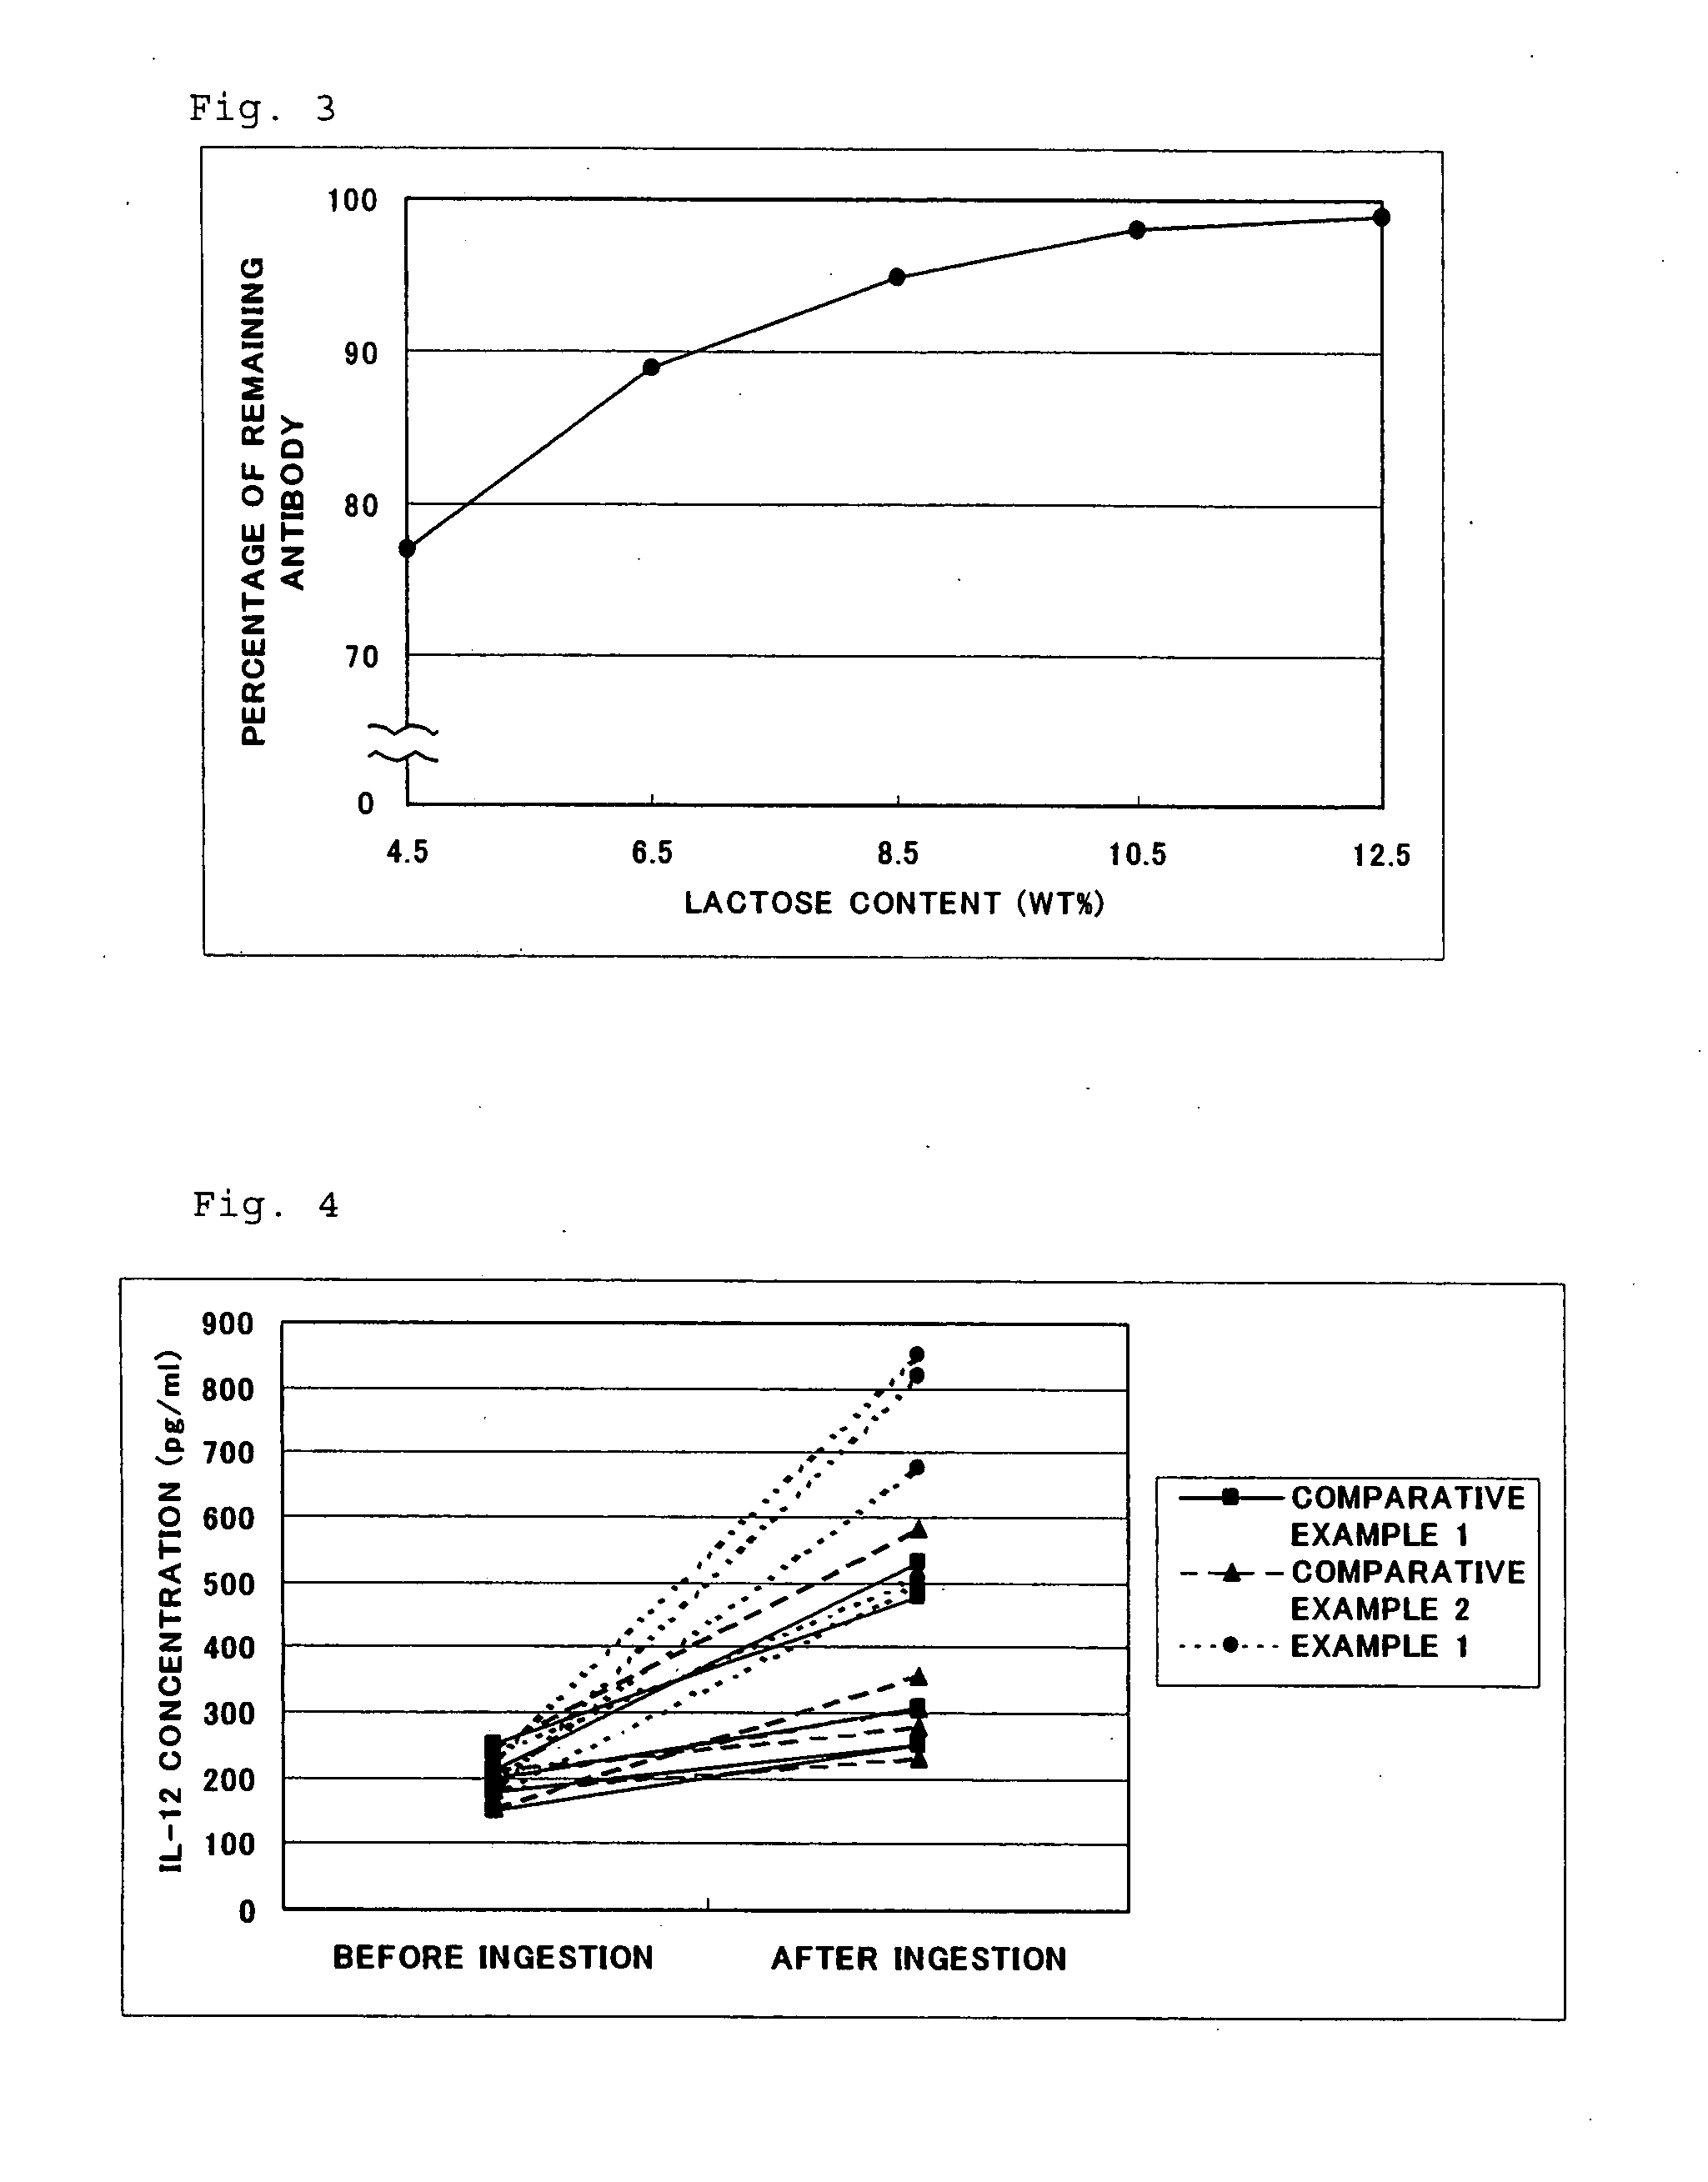 Functional Composition Or Food Comprising Whey Protein, Antibody Derived From Milk Or Antibody